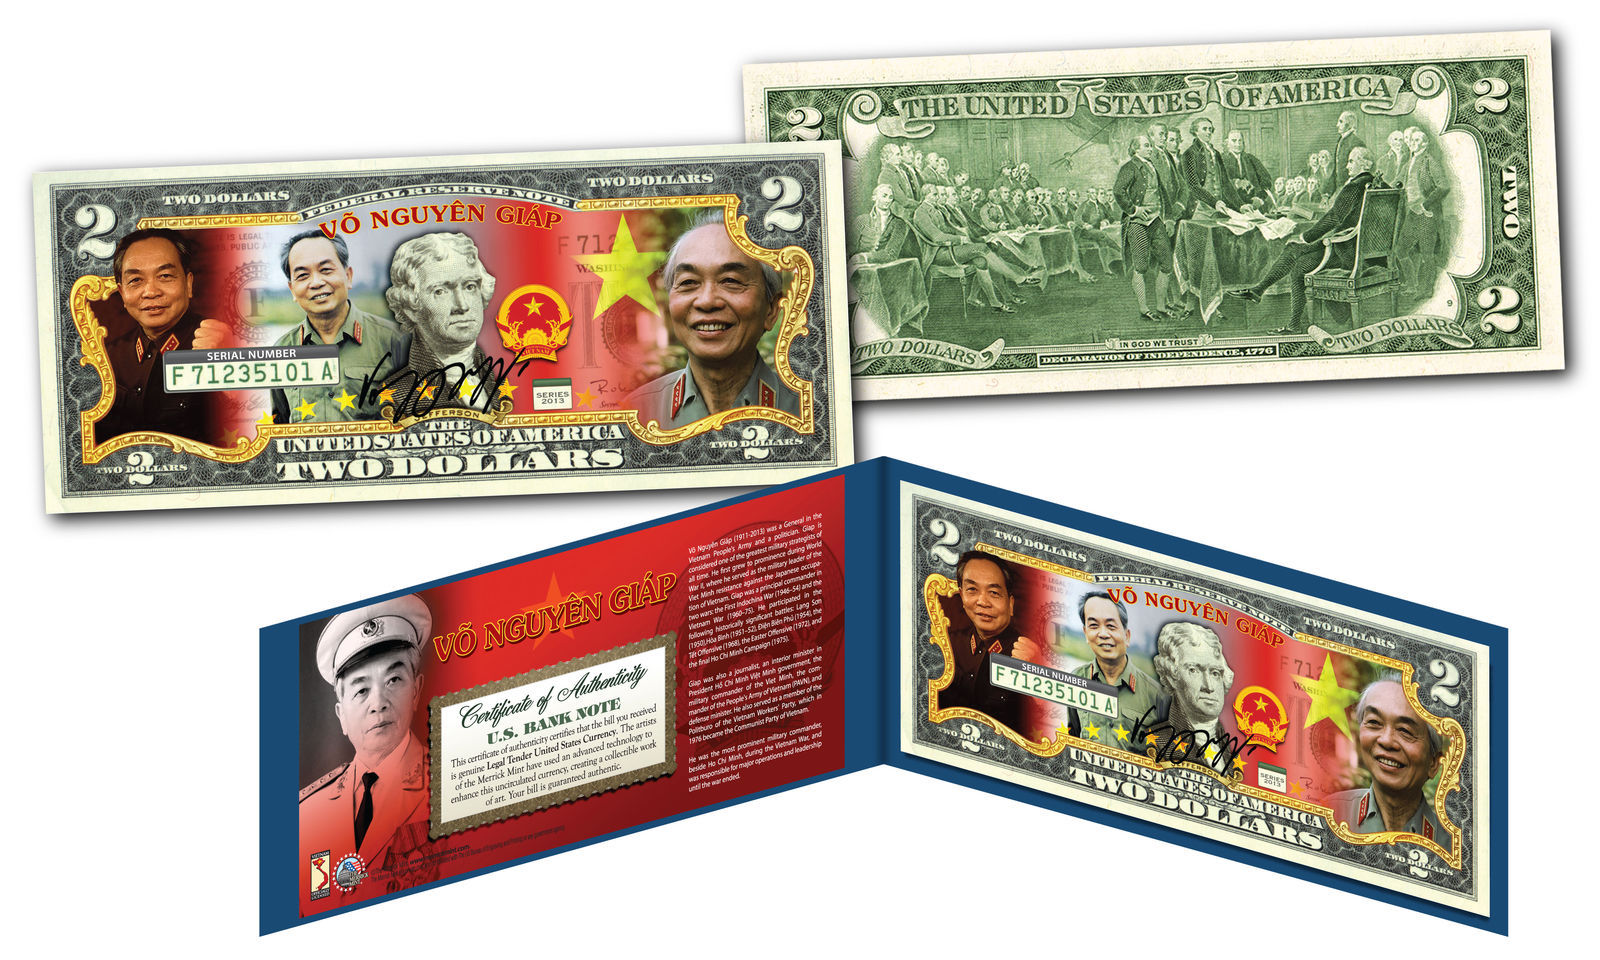 VO NGUYEN GIAP * Vietnam Icon & General * OFFICIAL Colorized Genuine US $2 Bill - $13.06